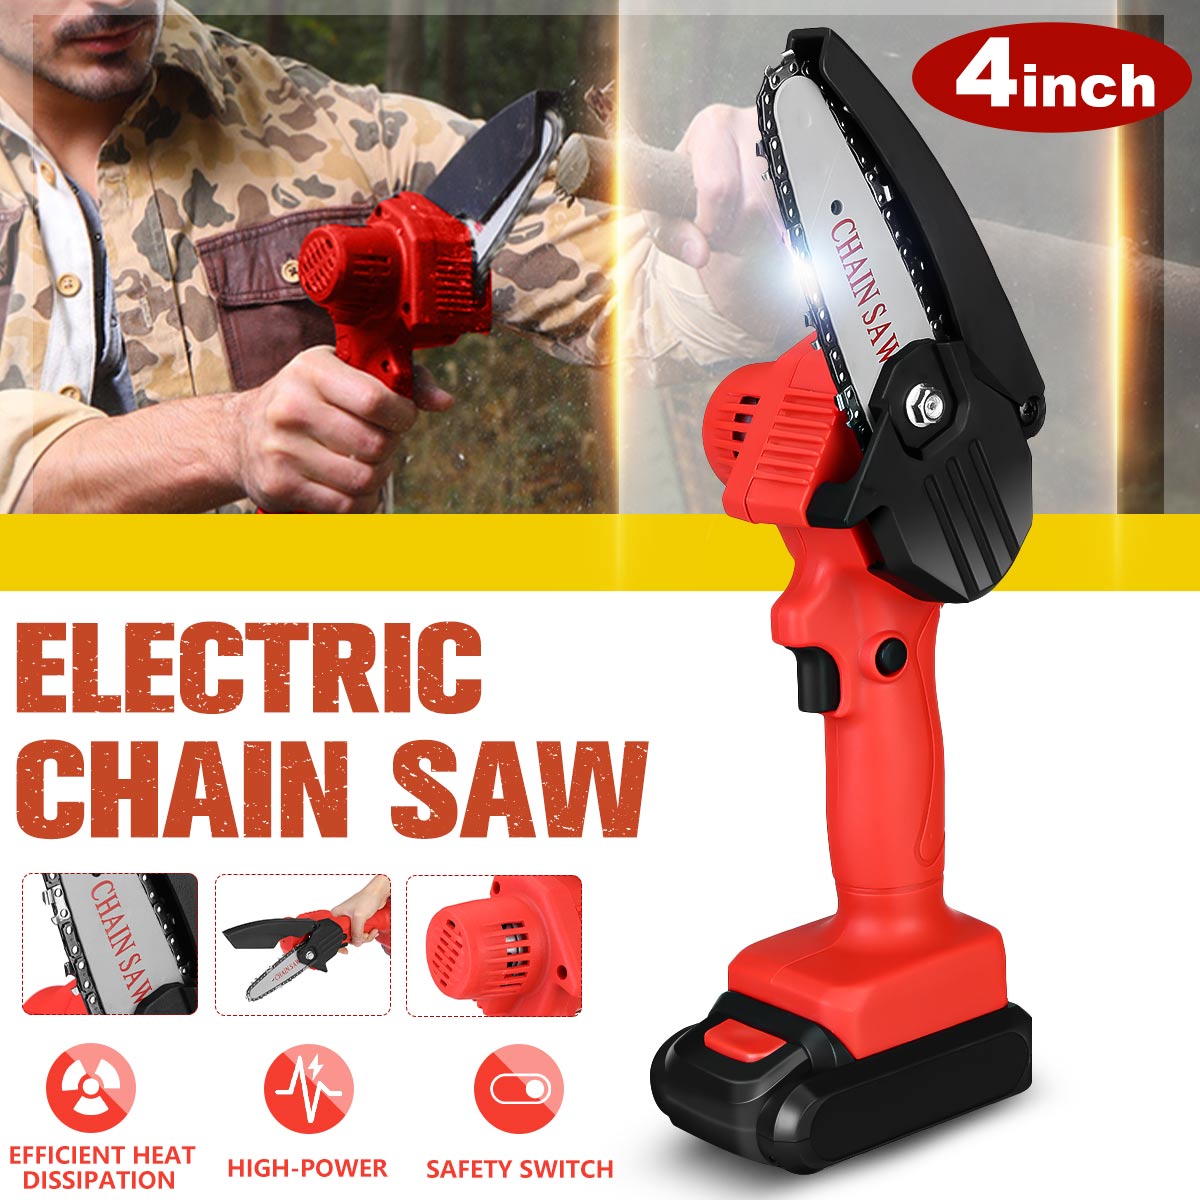 600W-4-inch-Cordless-Electric-Chainsaw-Wood-Cutter-Mini-One-Hand-Saw-Woodworking-Tool-1782286-2